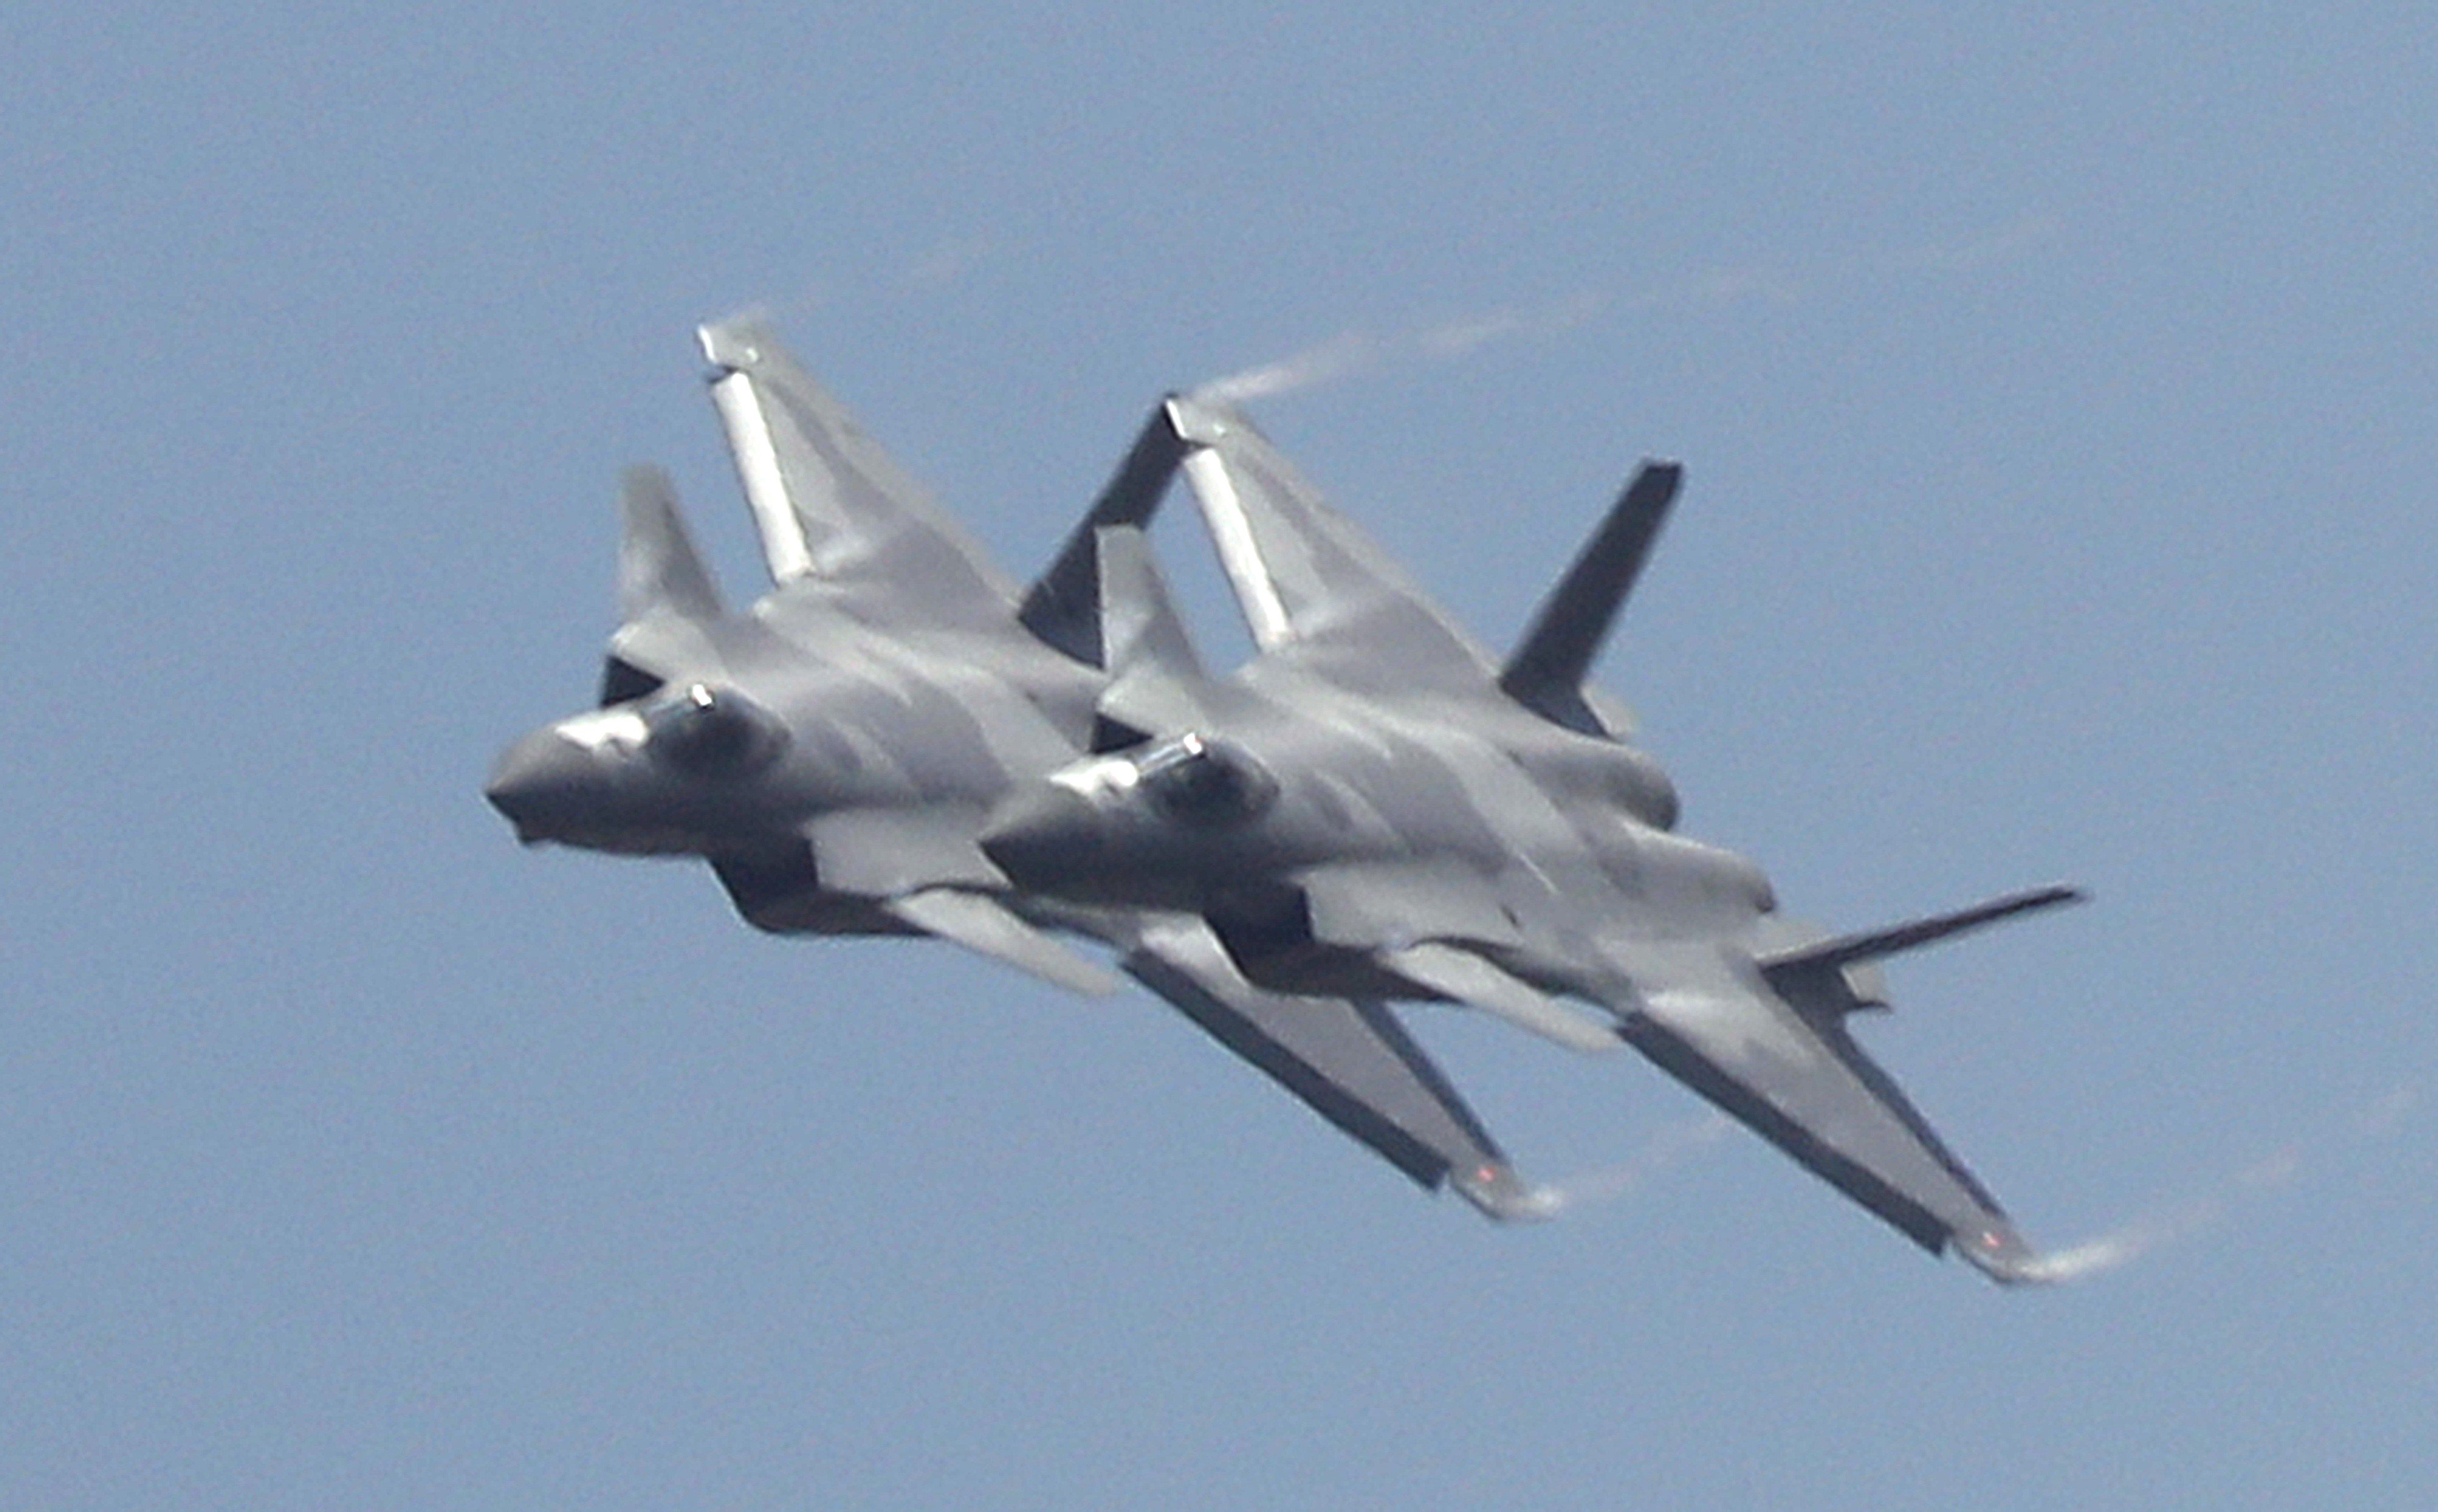 J-20s with Russian engines in action at the Zhuhai air show. Photo: Dickson Lee